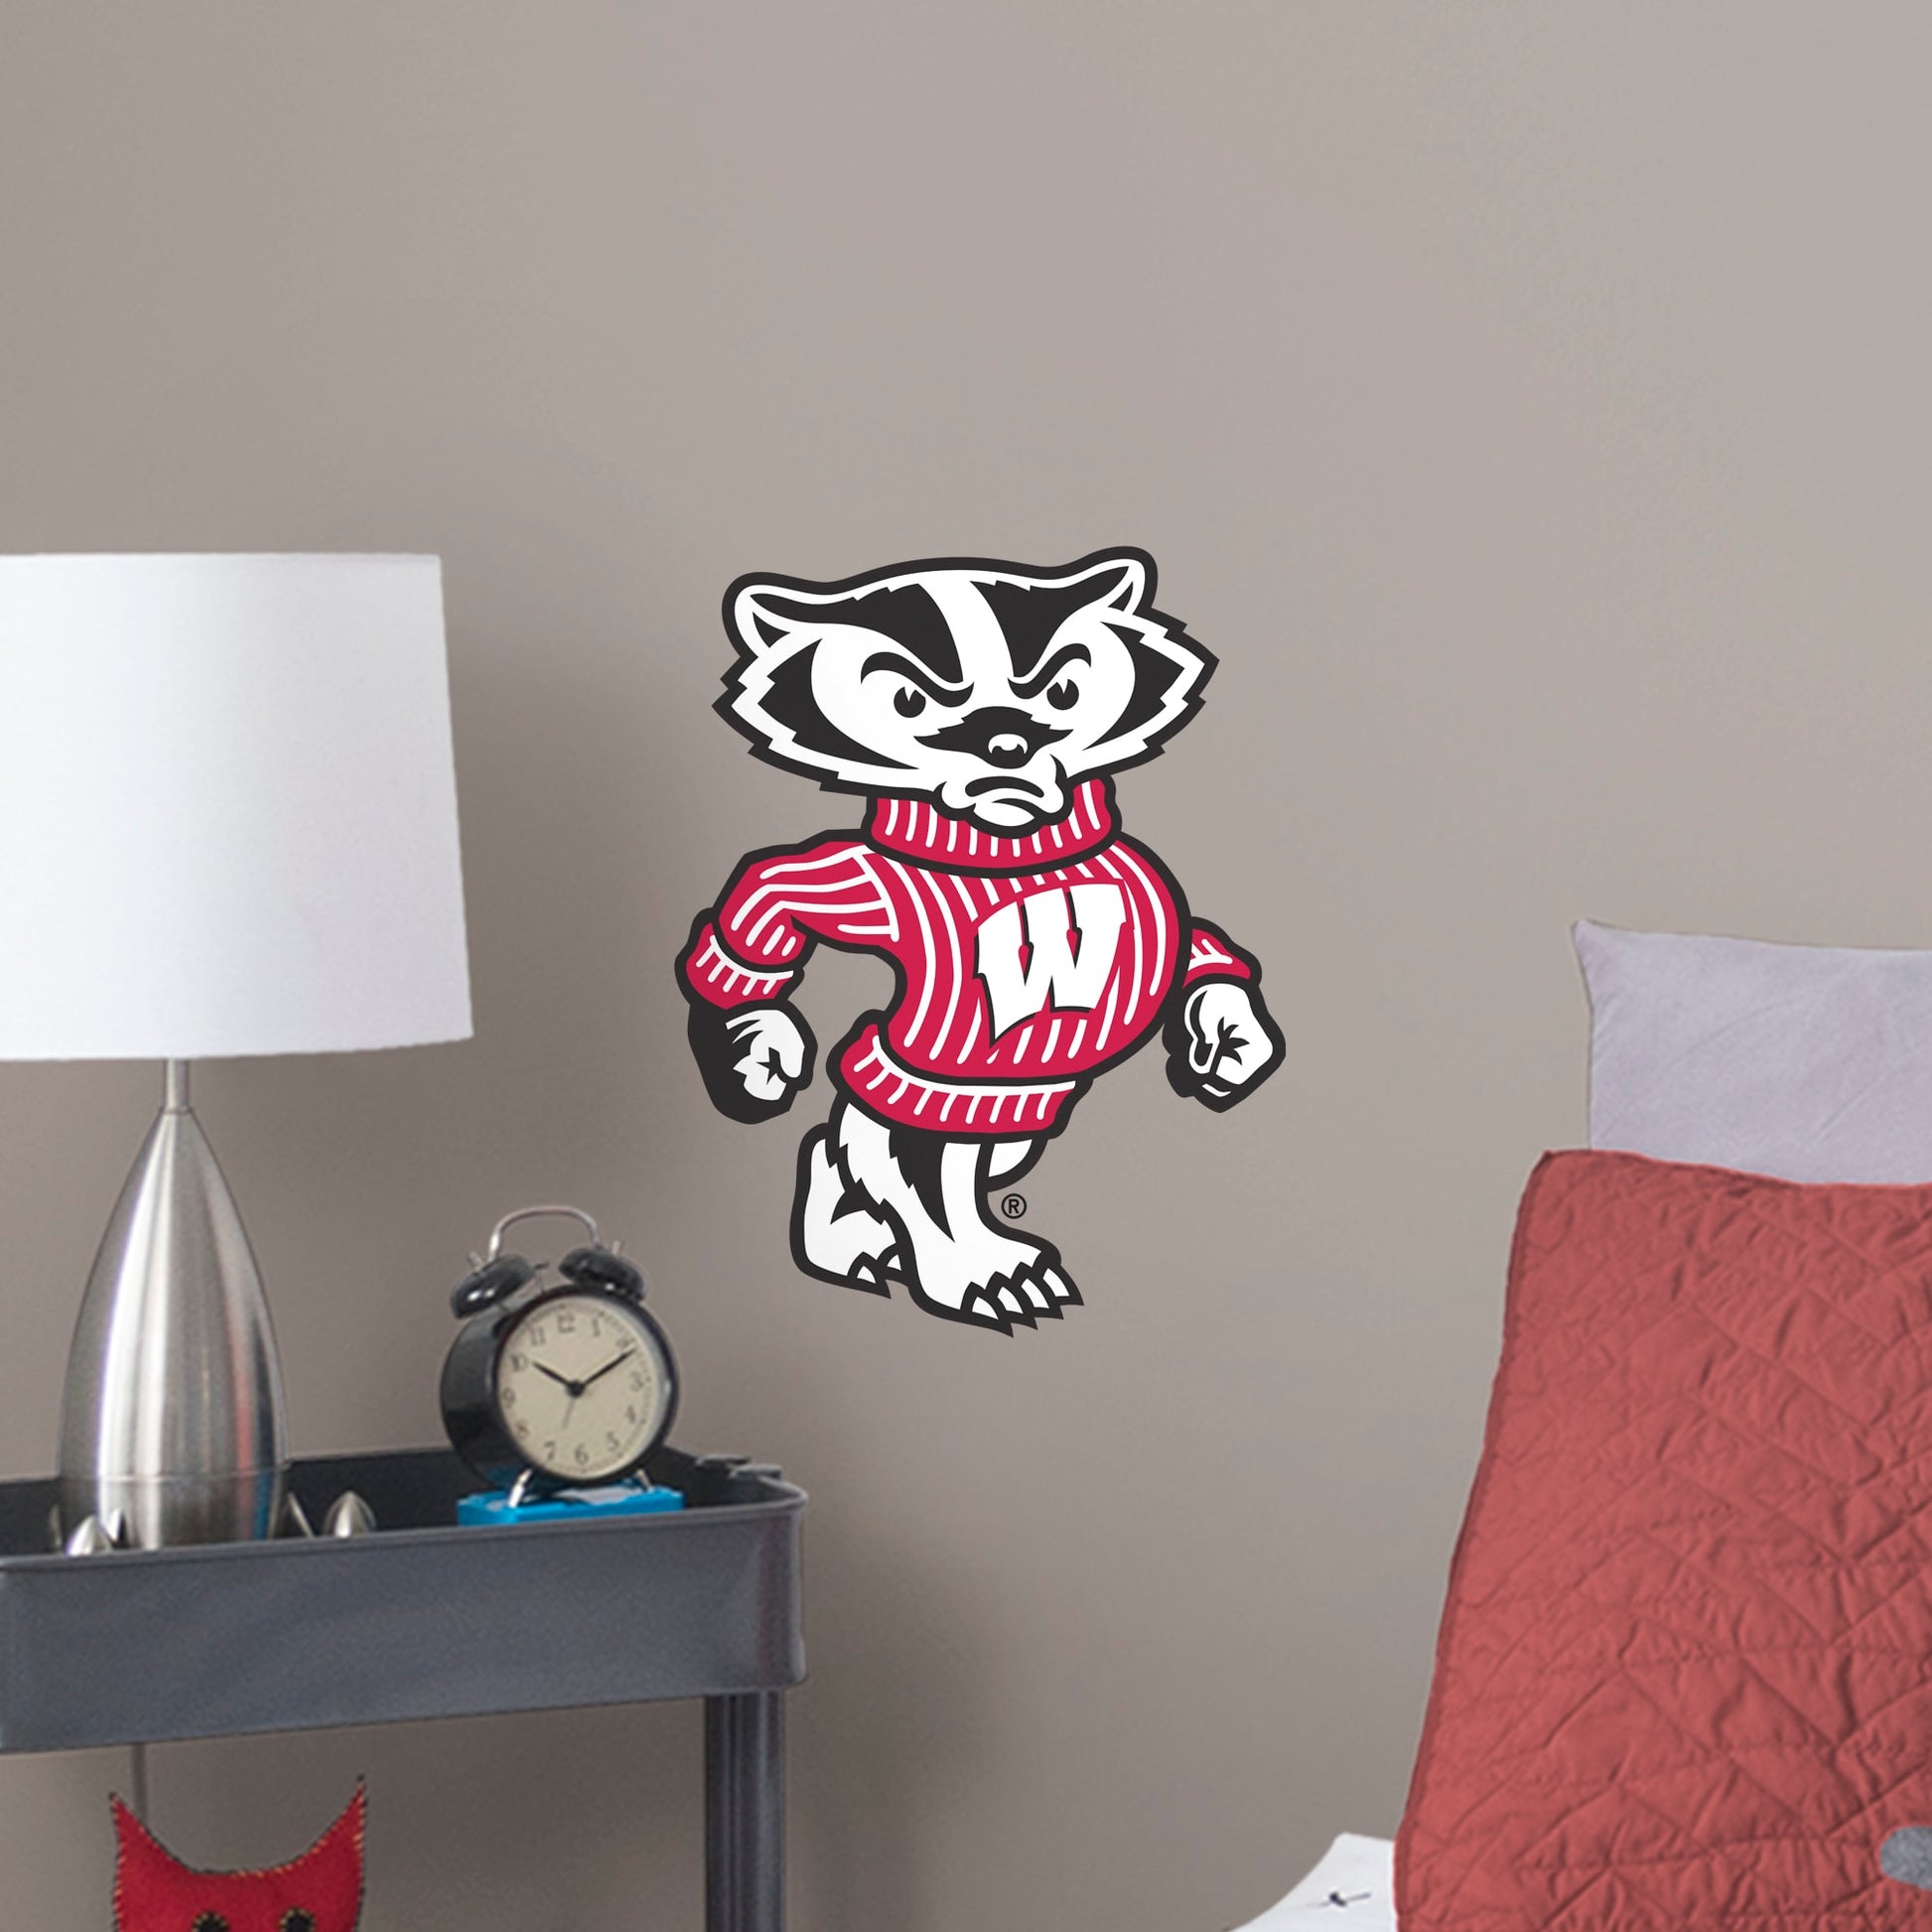 Giant Mascot + 2 Decals (35"W x 45"H)